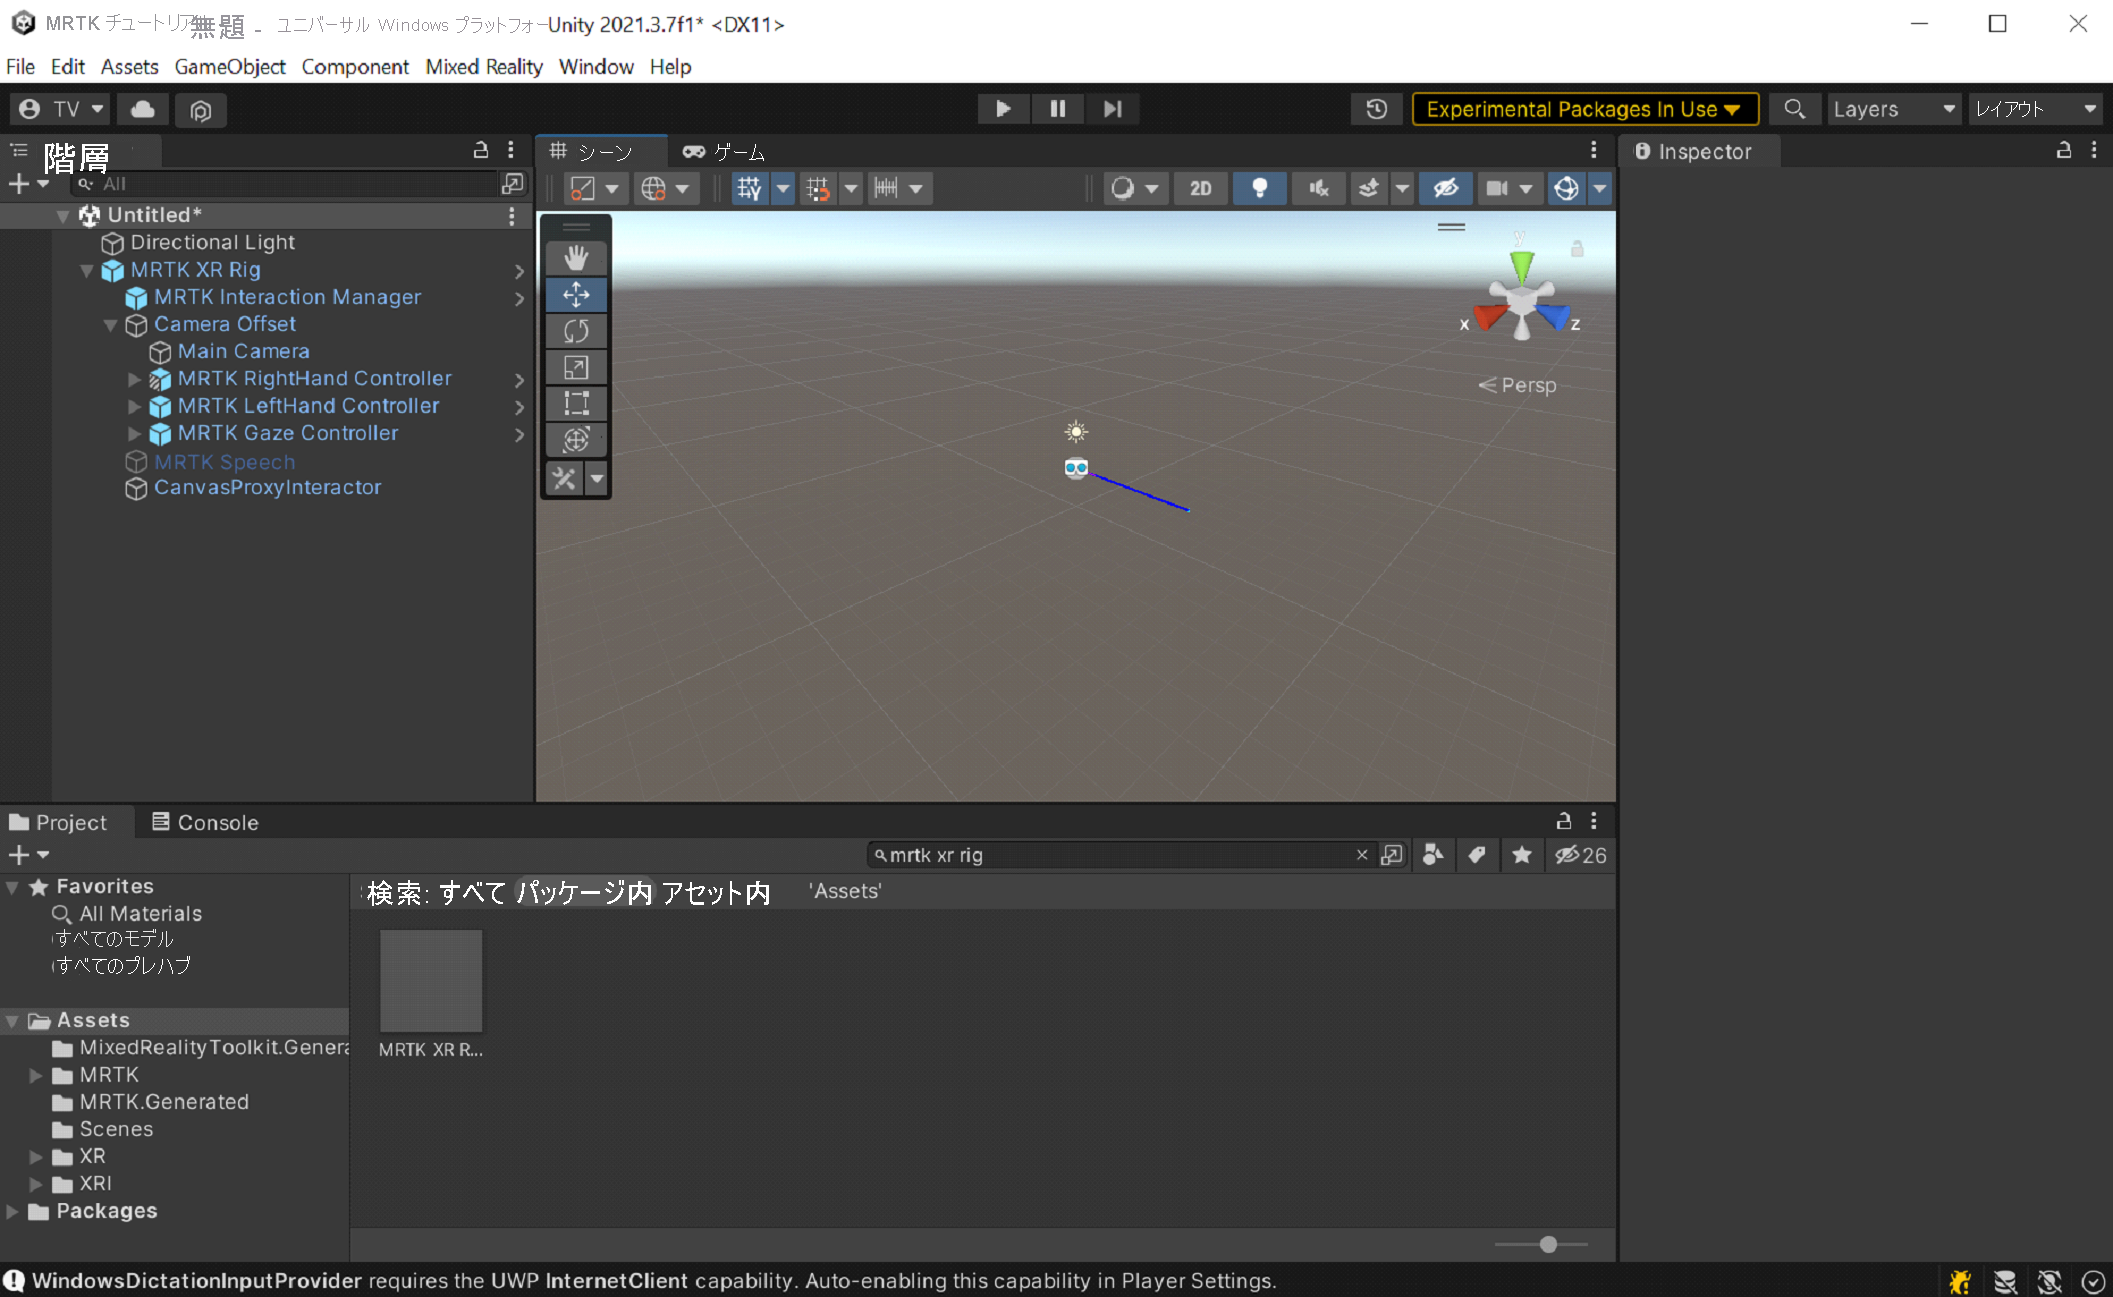 Screenshot of the Mixed Reality Toolkit in the Inspector.